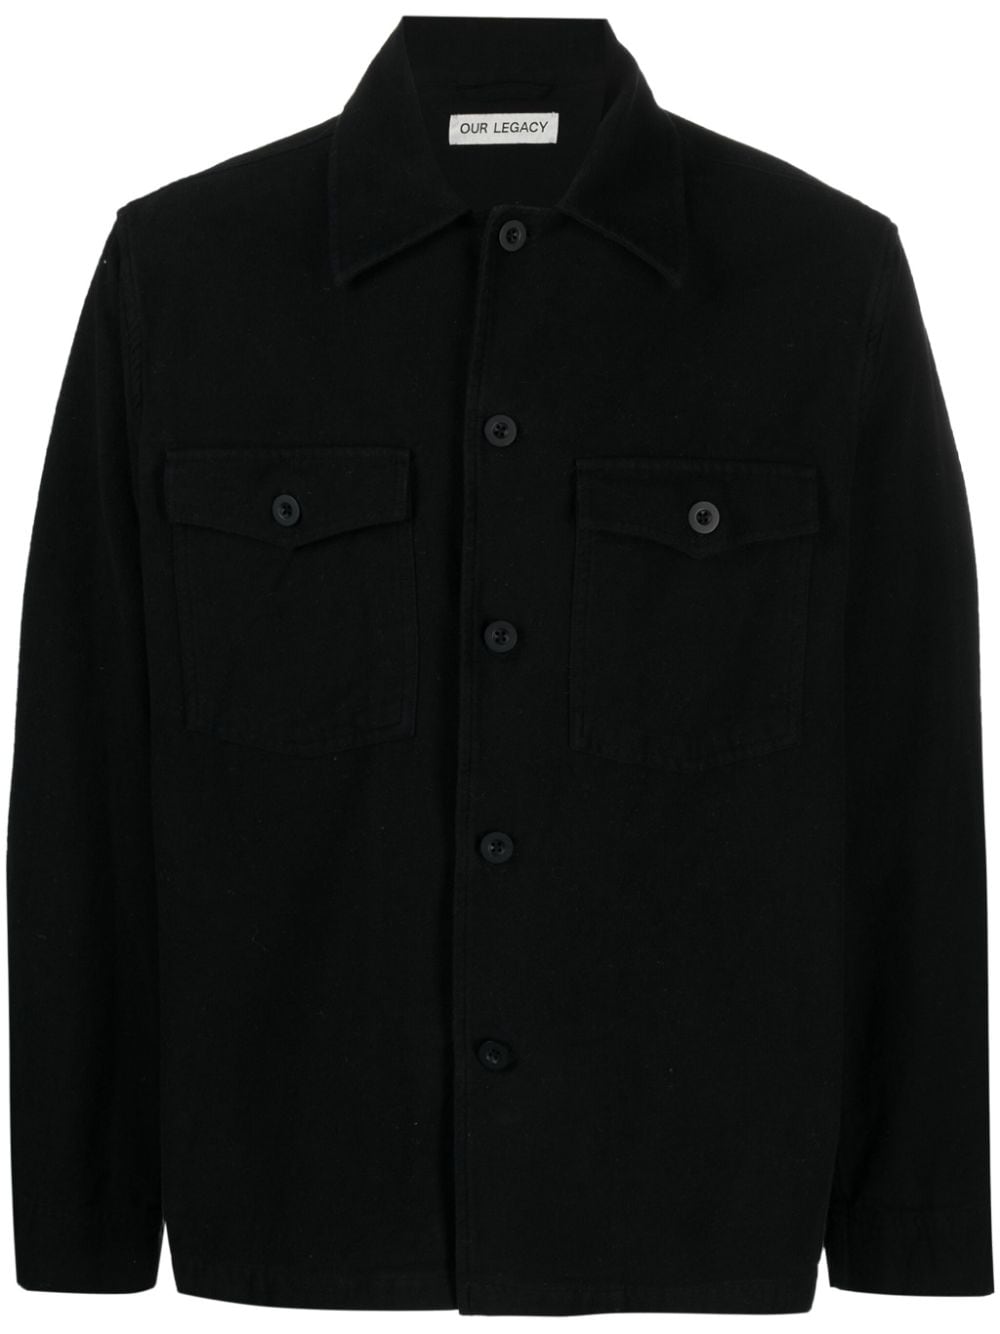 OUR LEGACY BUTTONED COTTON JACKET